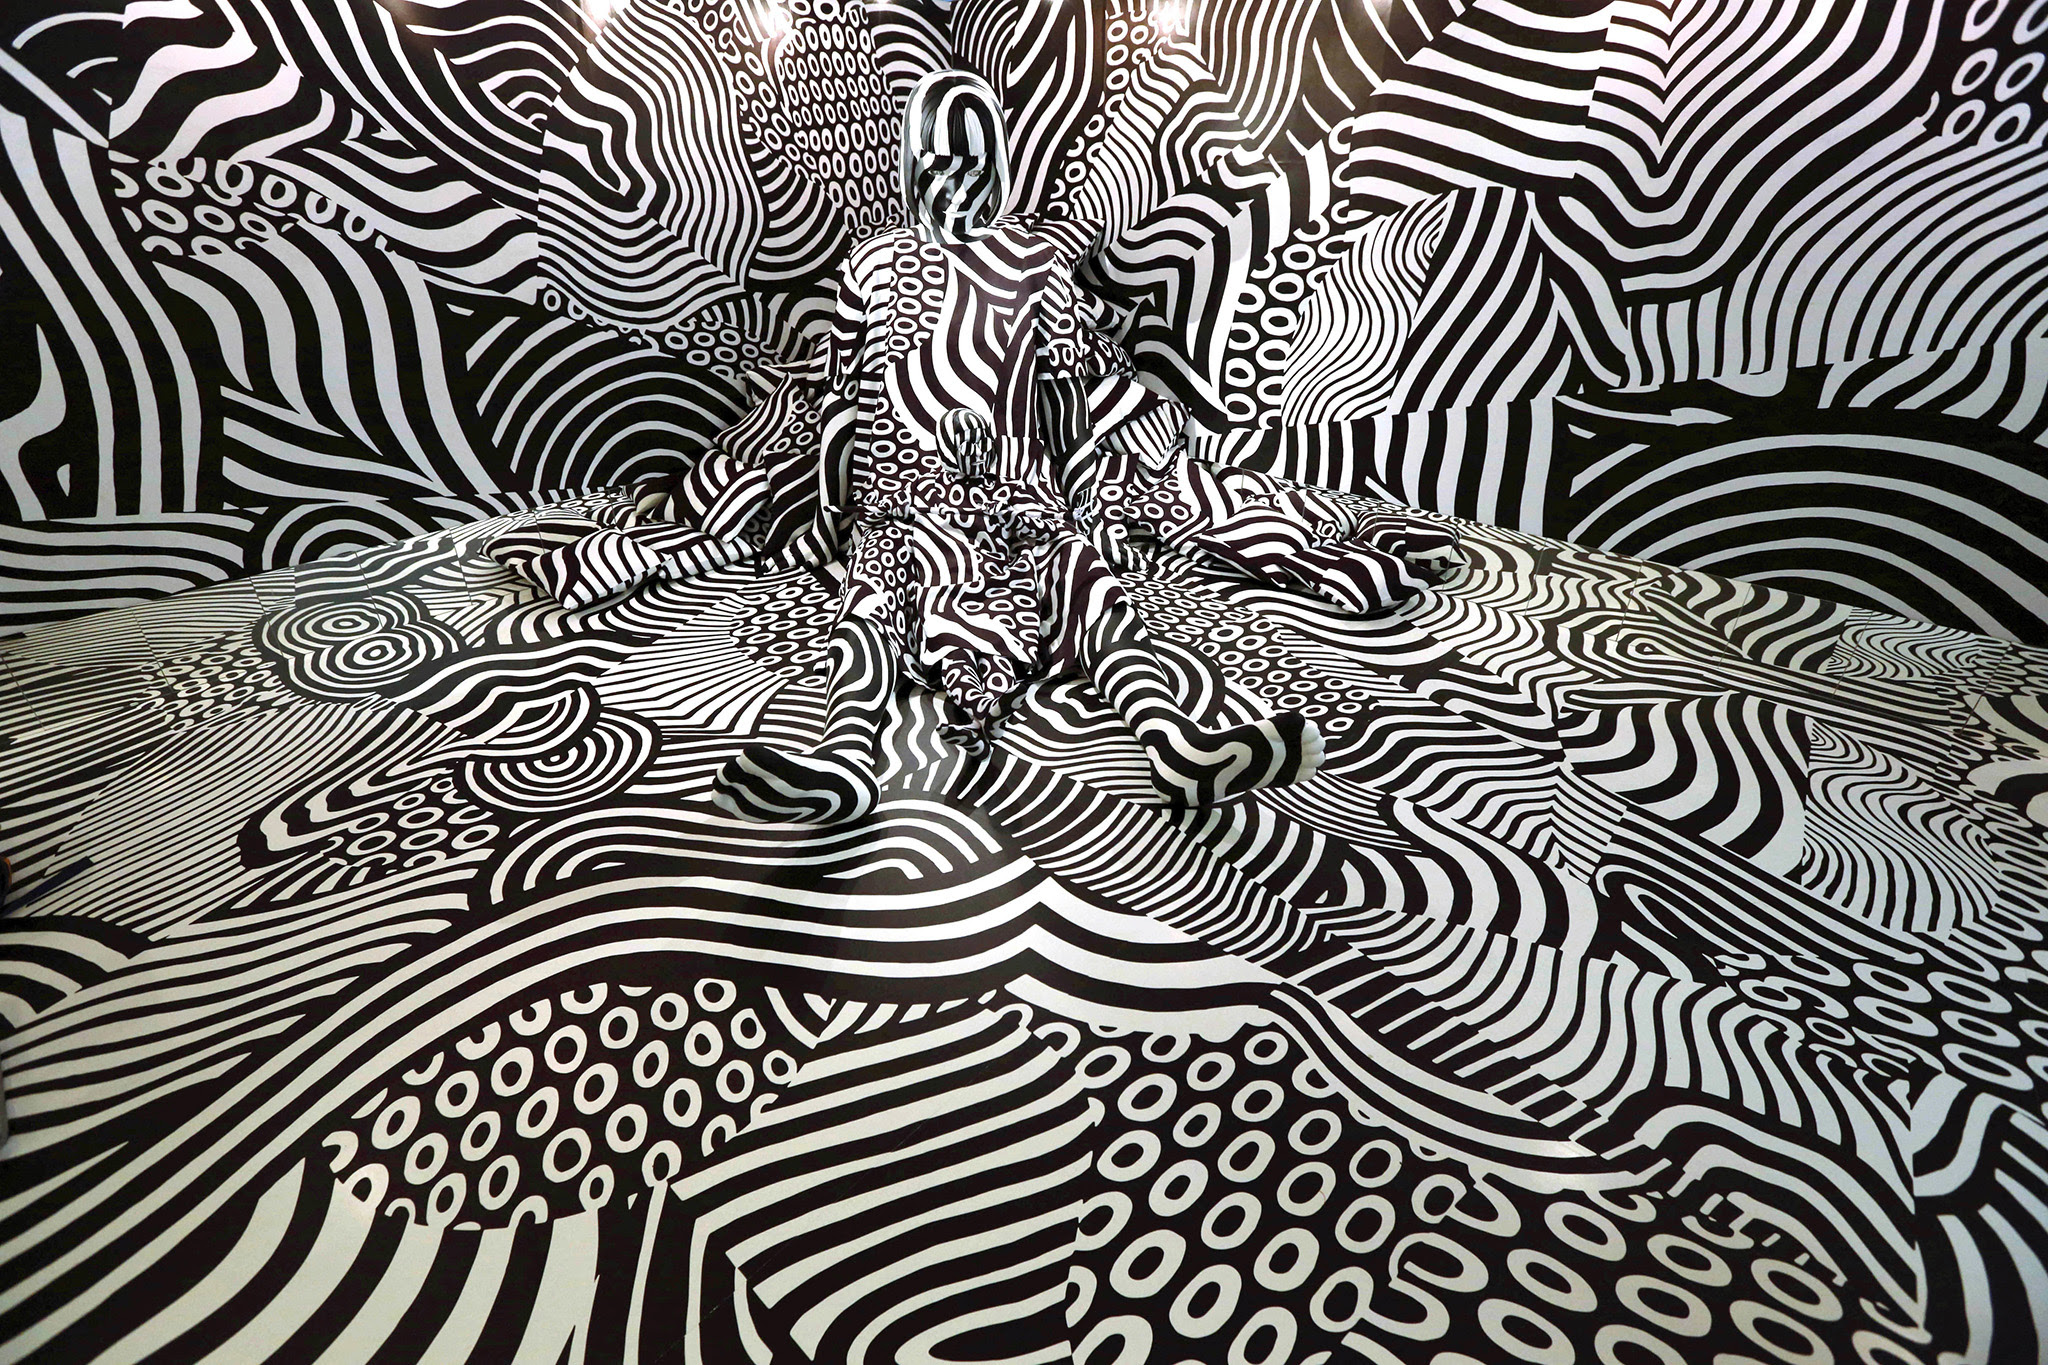 Model feebee poses as part of art installation "Narcissism : Dazzle room" made by artist Shigeki Matsuyama at rooms33 fashion and design exhibition in Tokyo, Wednesday, Sept. 14, 2016. Matsuyama's installation features a strong contrast of black and white, which he learned from dazzle camouflage used mainly in World War I. (AP Photo/Eugene Hoshiko)